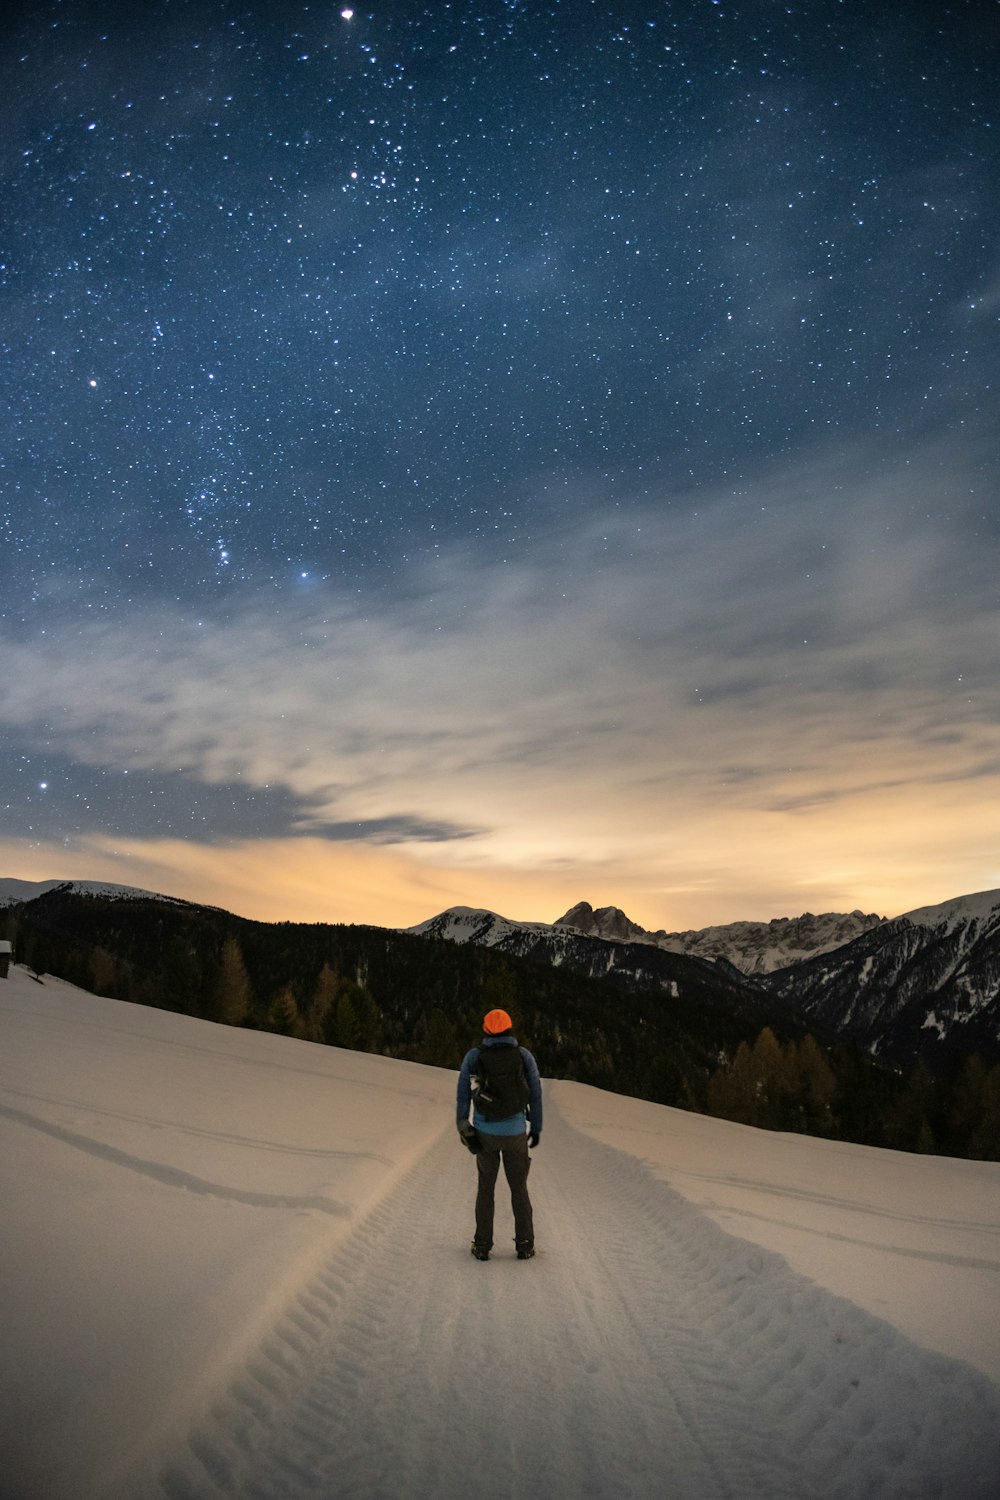 a man standing on top of a snow covered slope under a night sky